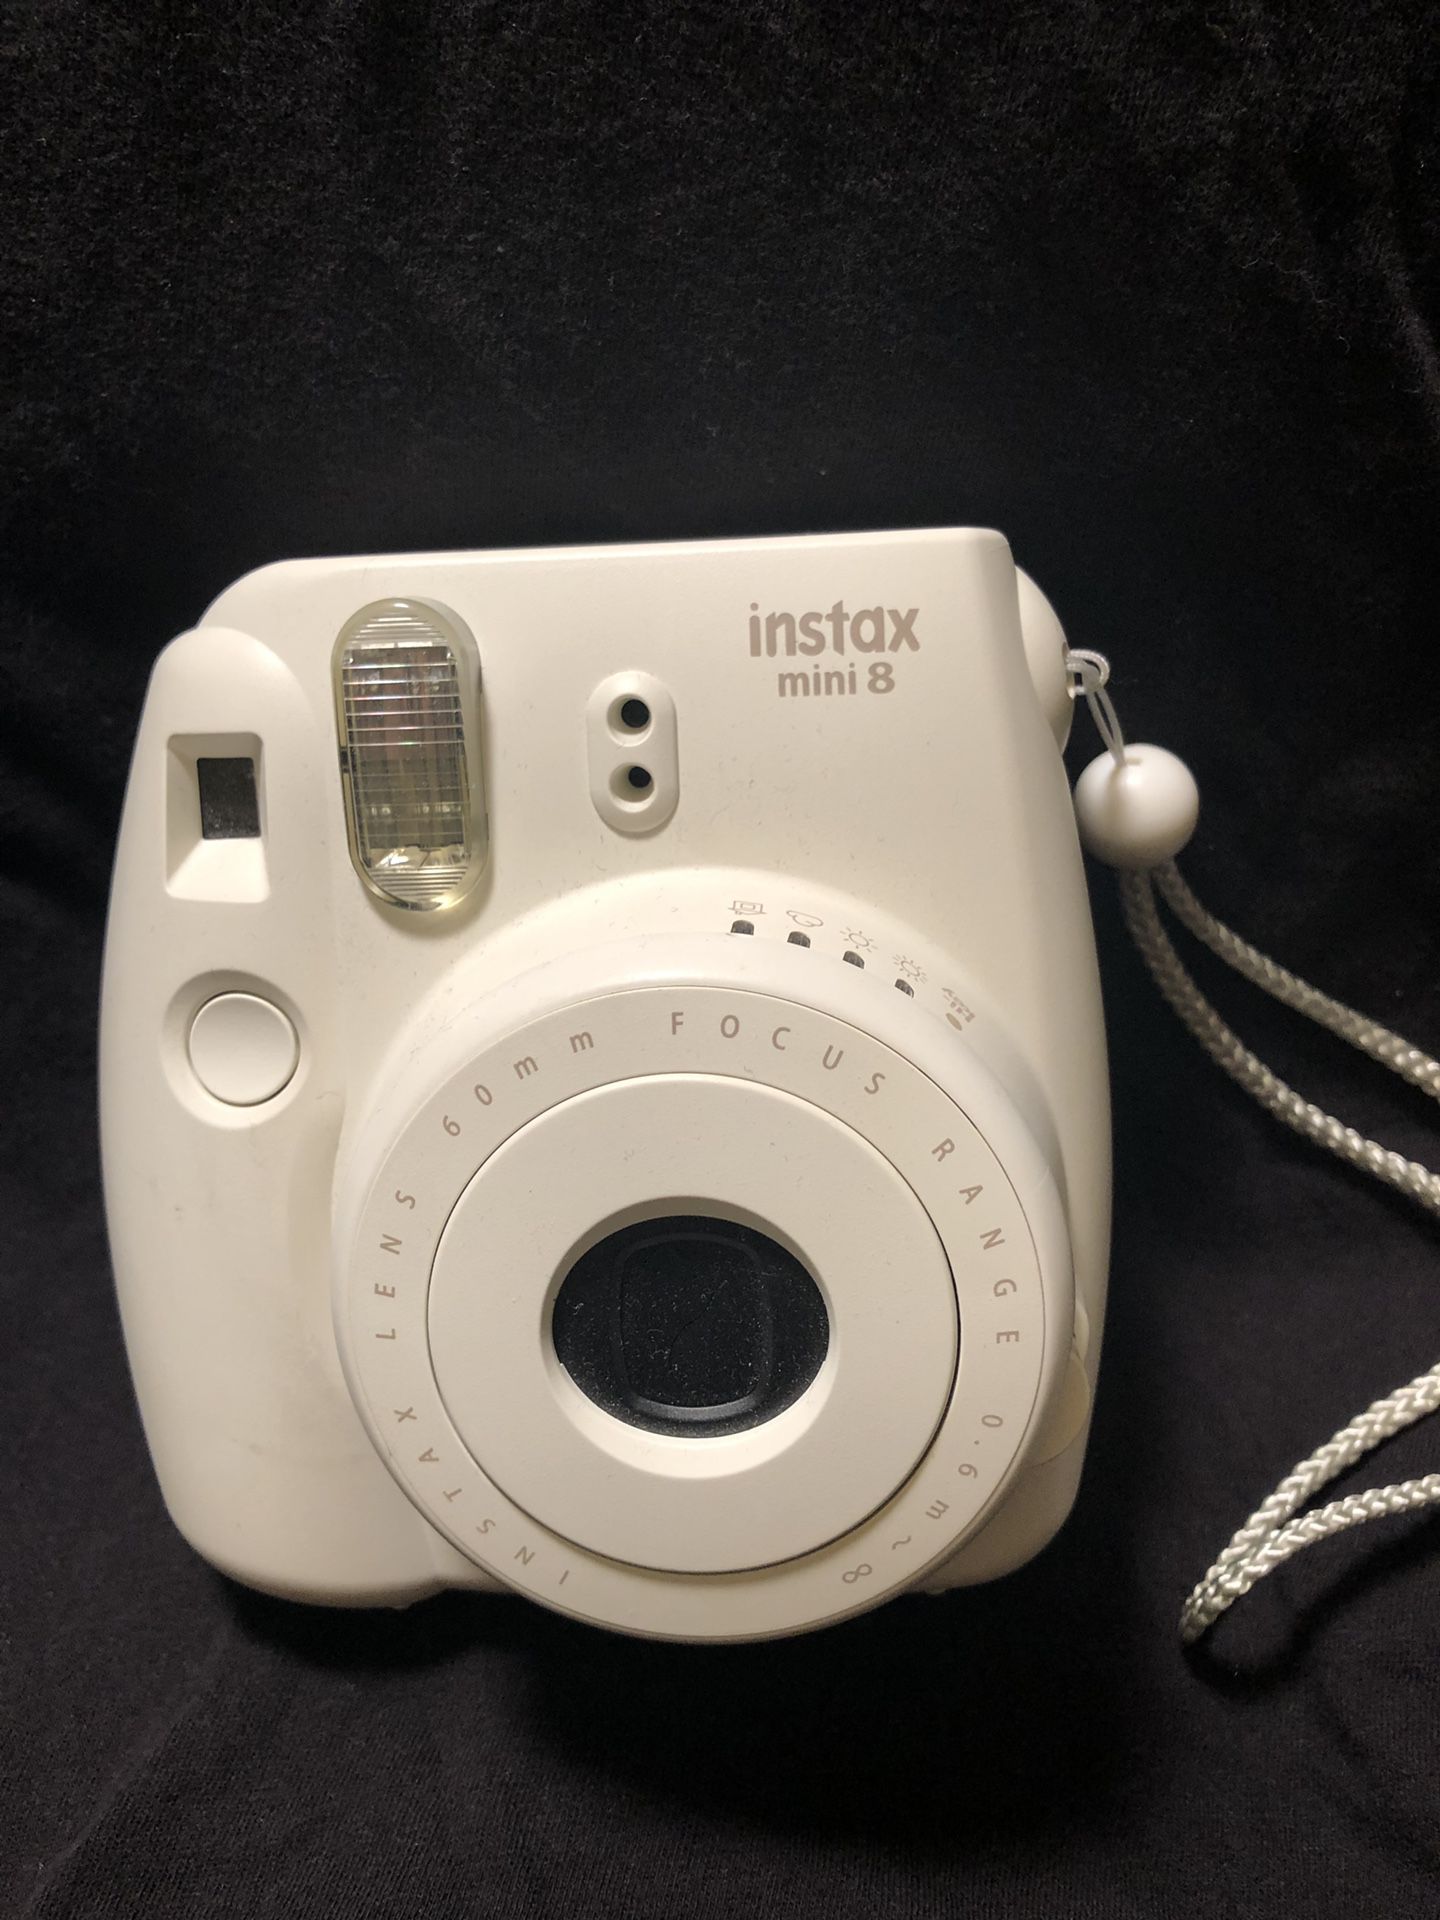 Instax mini 8 camera. White. Tested, works.